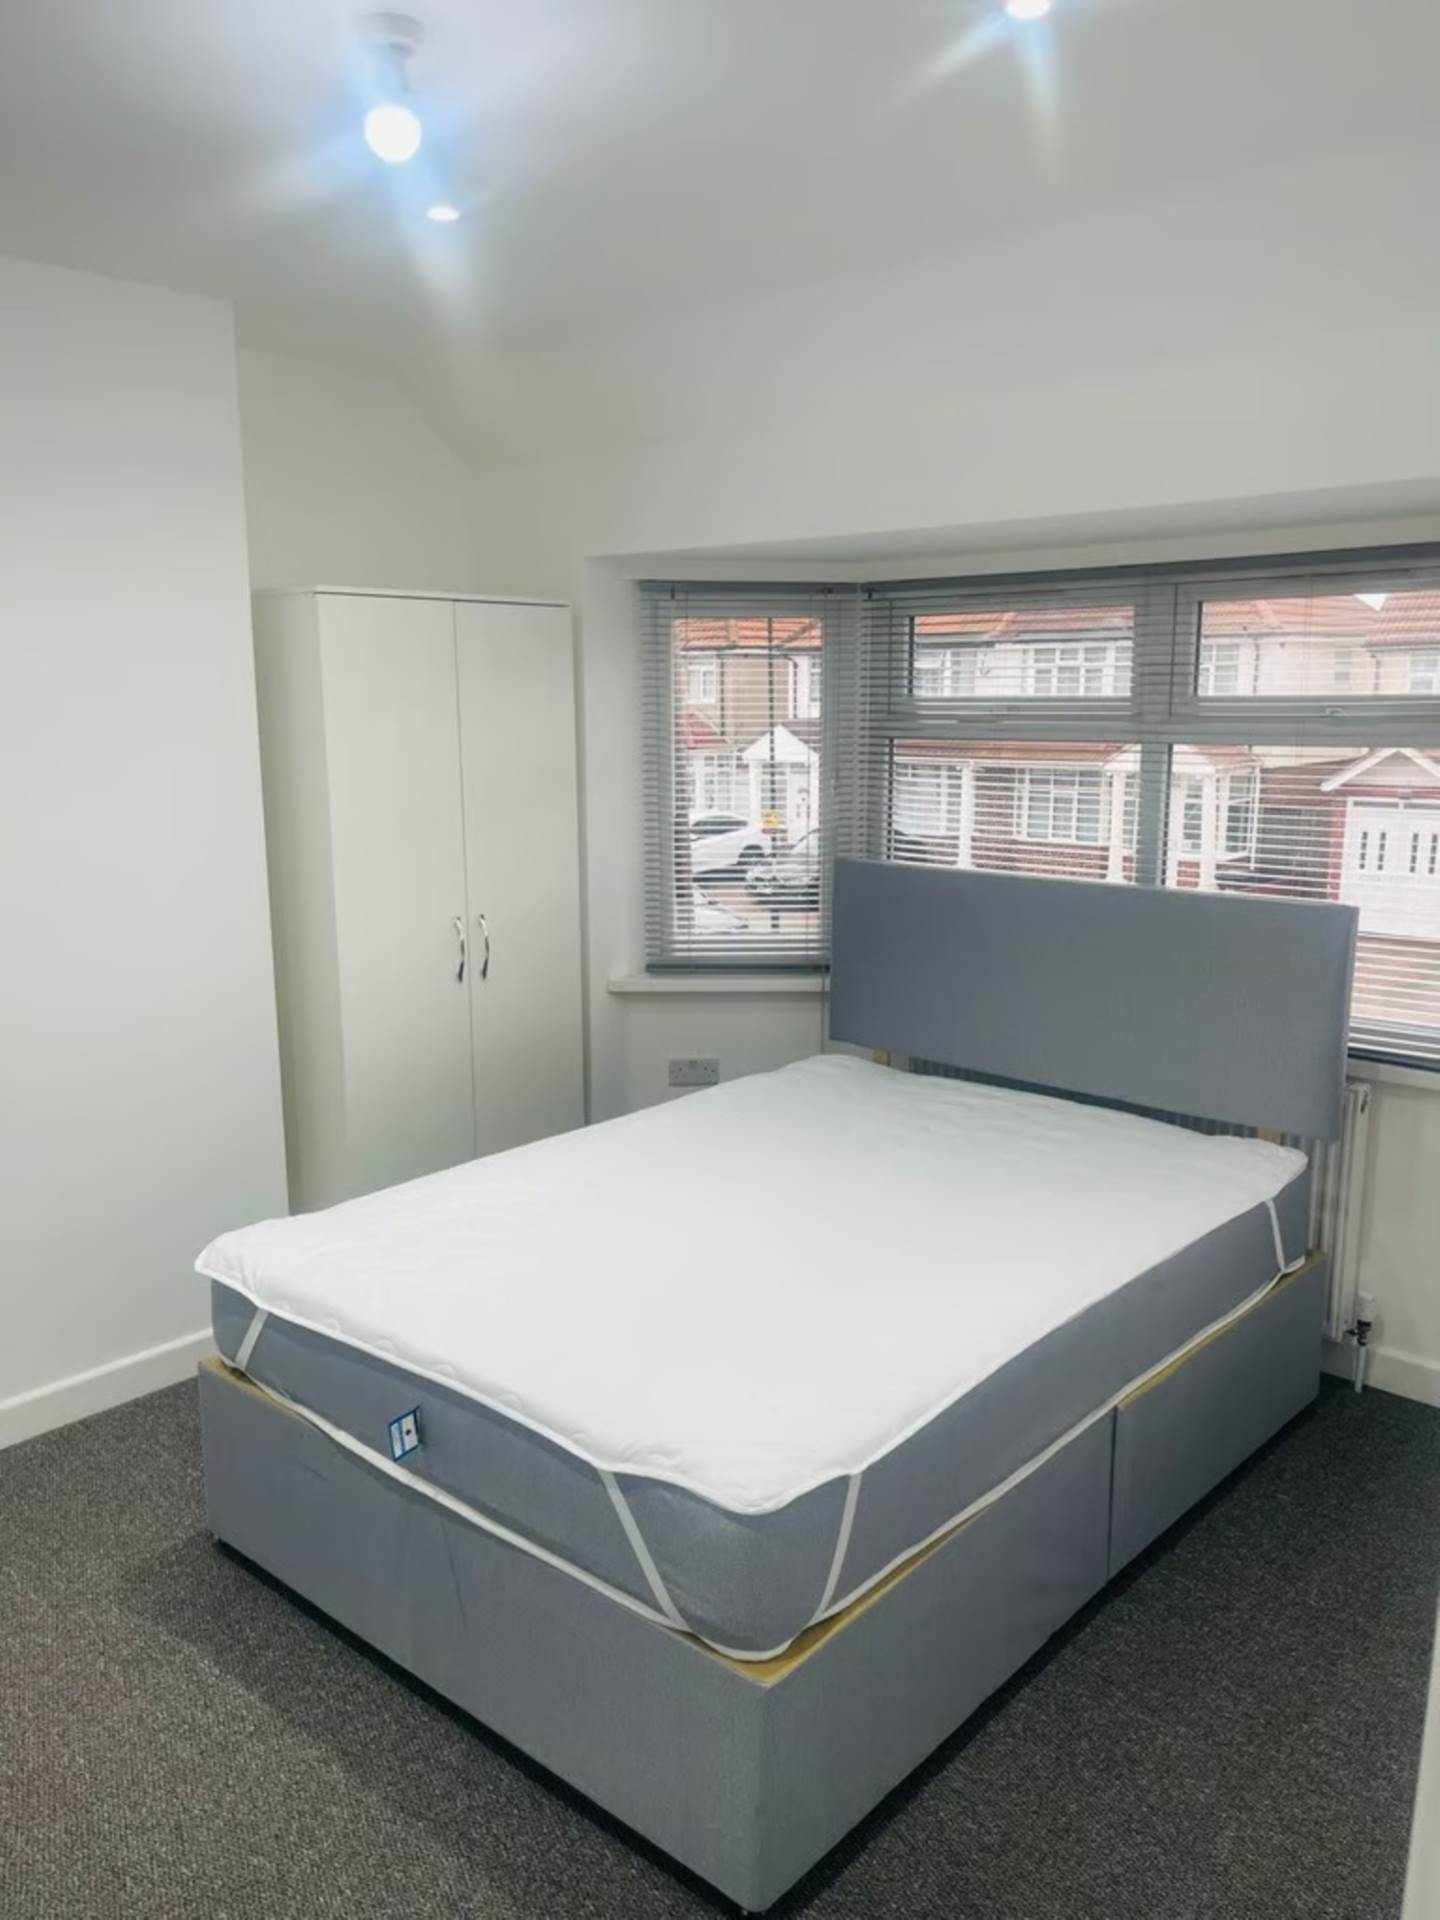 4 bed Room for rent in Hounslow. From Sutherland Estates